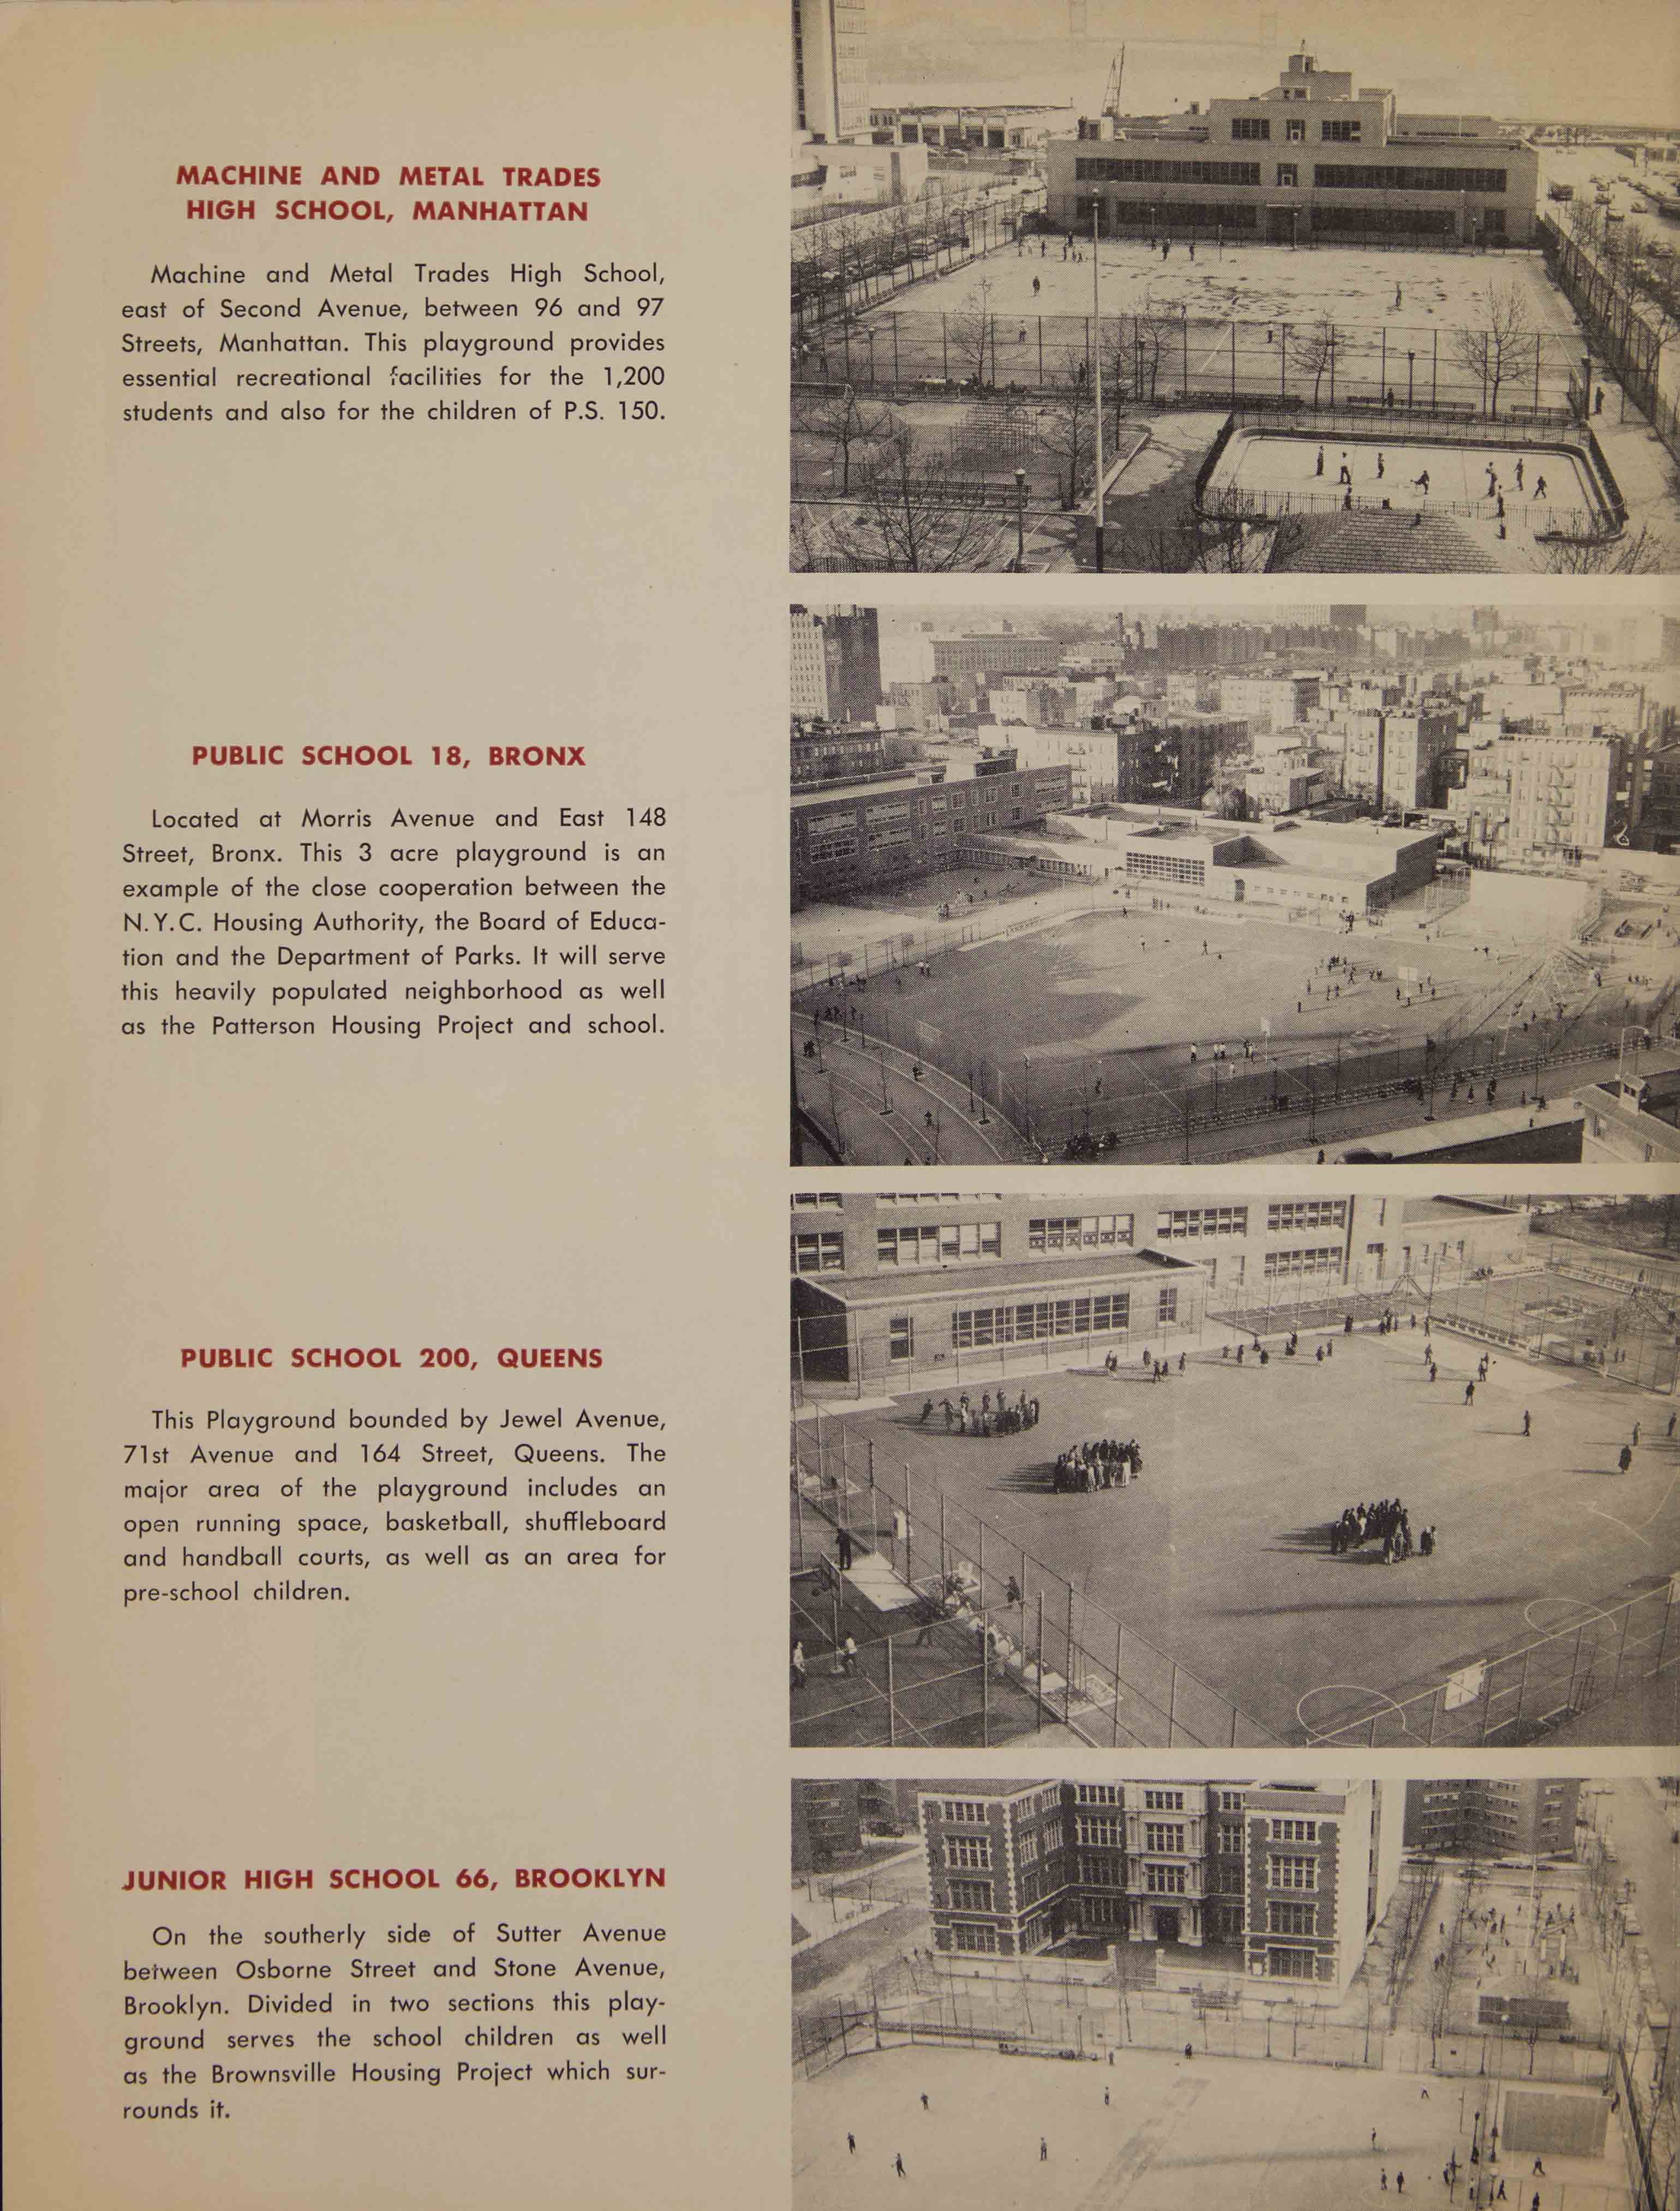 Black and white aerial photos of four playgrounds showing children playing. Manhattan's Machine and Metal Trades High School; PS 18, Bronx; PS 200, Queens and JHS 66, Brooklyn.